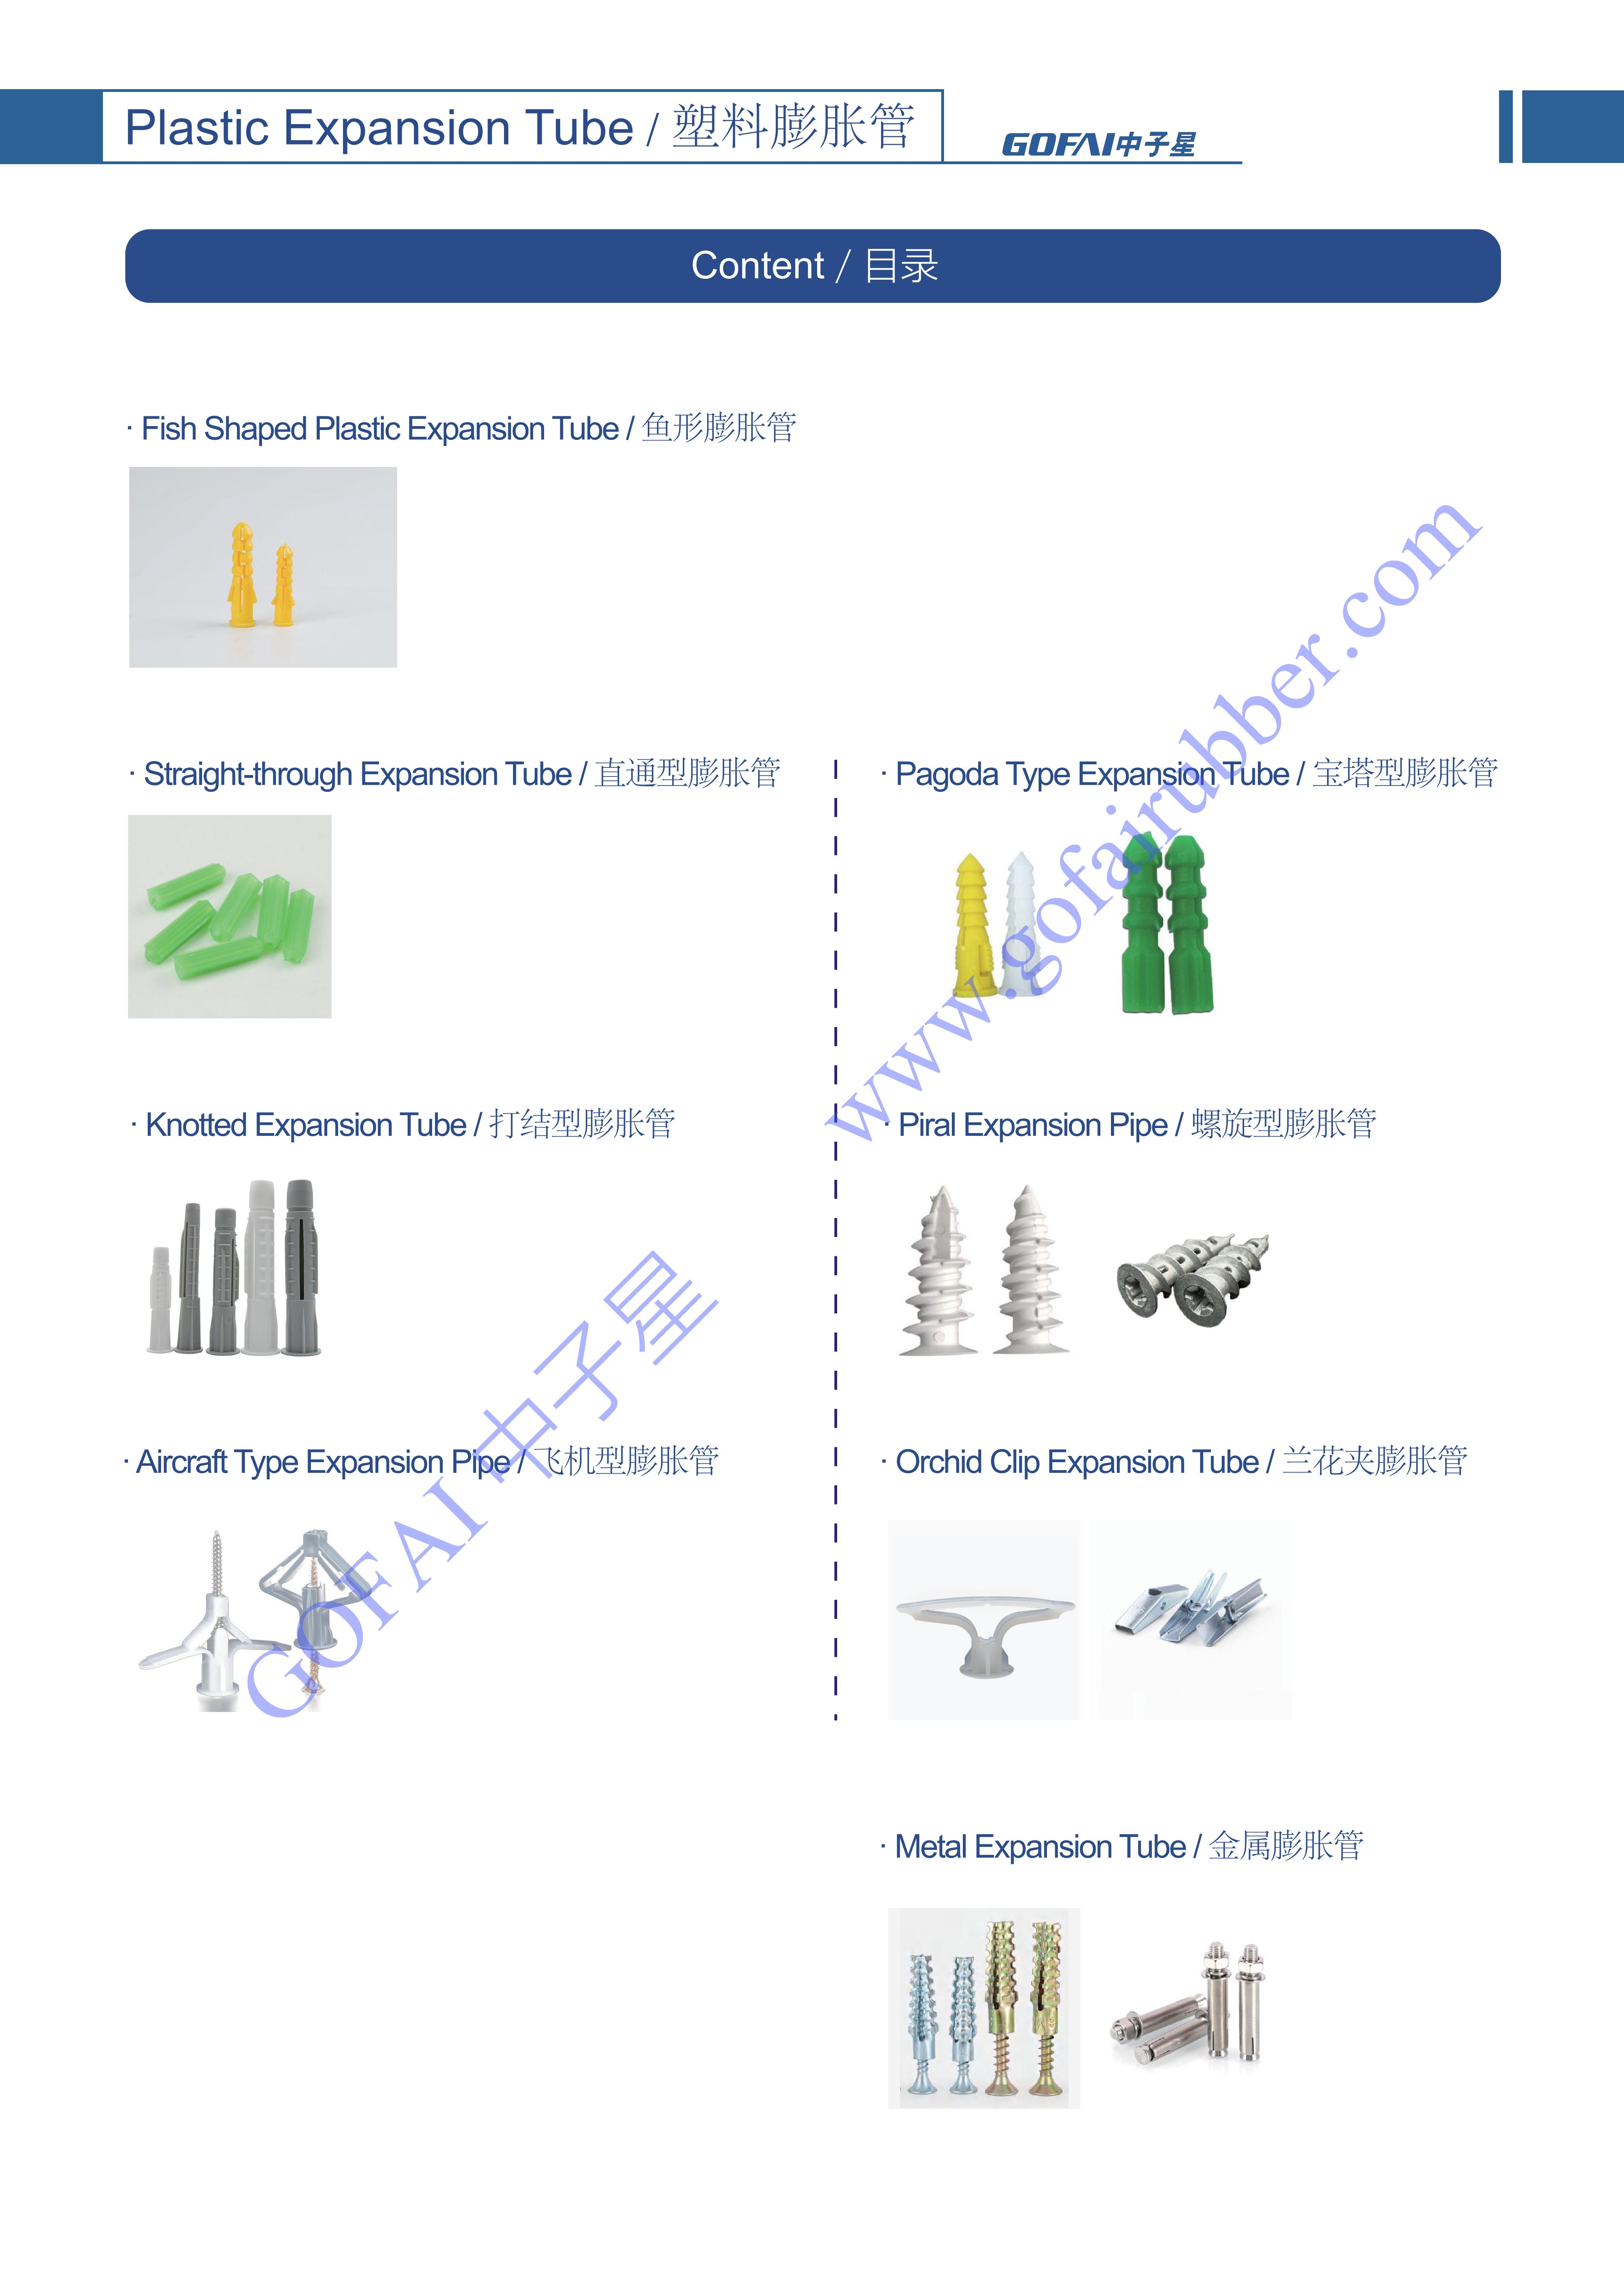 GOFAI Plastic Expansion Tube Series Products Brochure_1.jpg